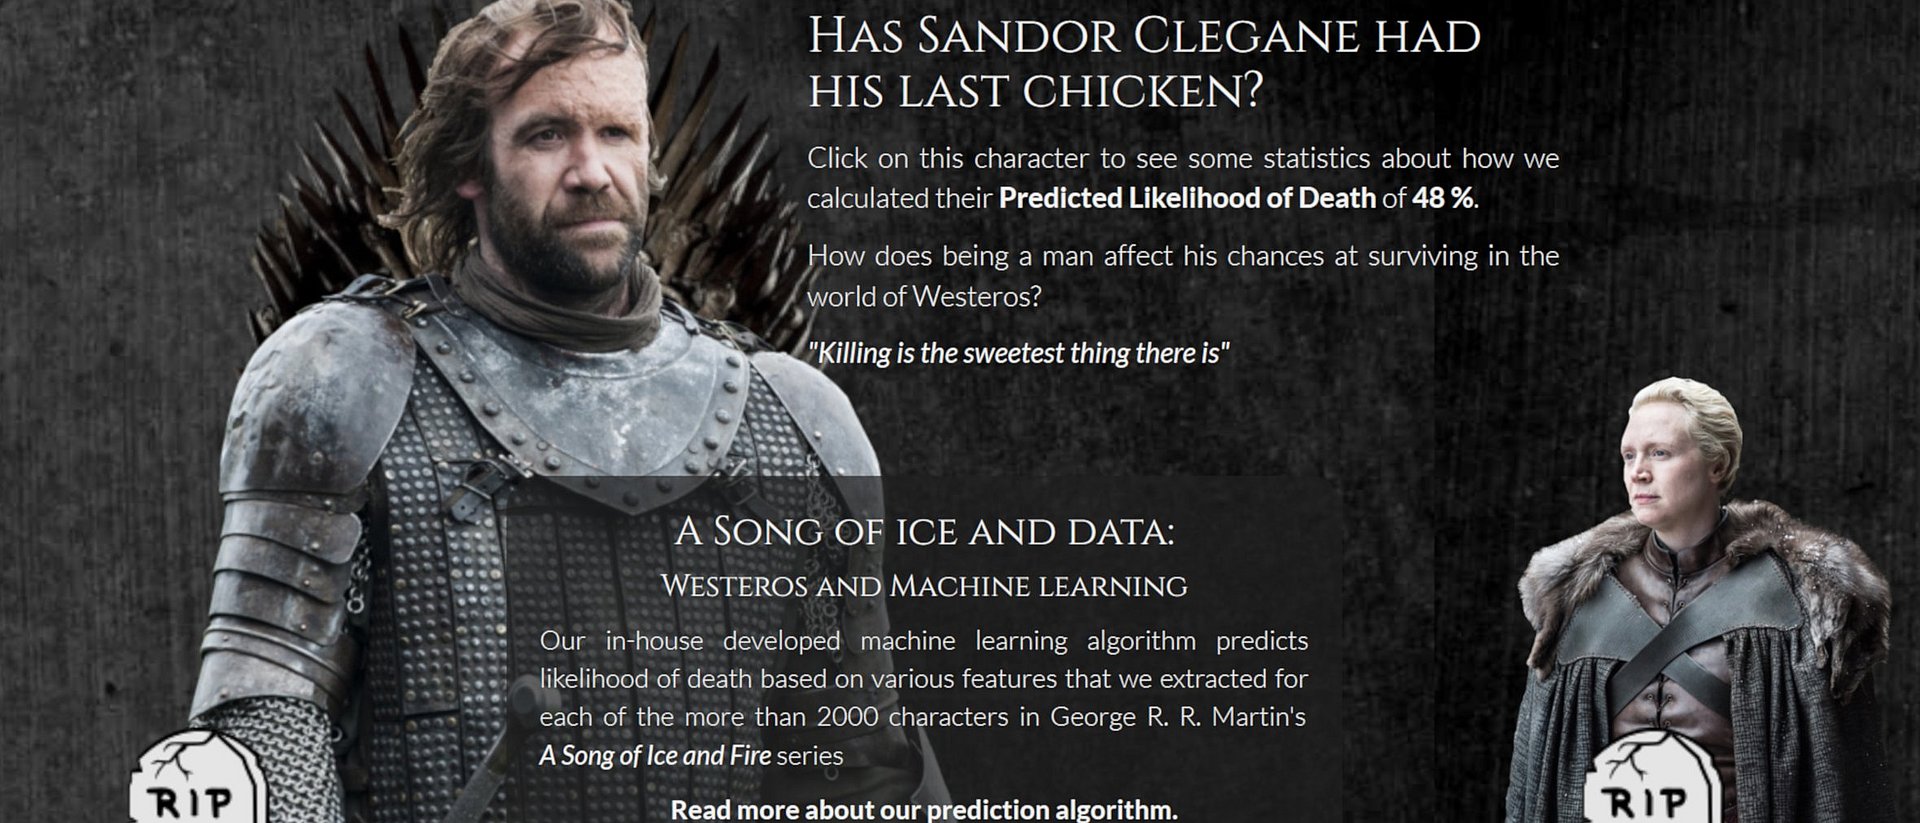 Website showing survival chances of Game of Thrones characters